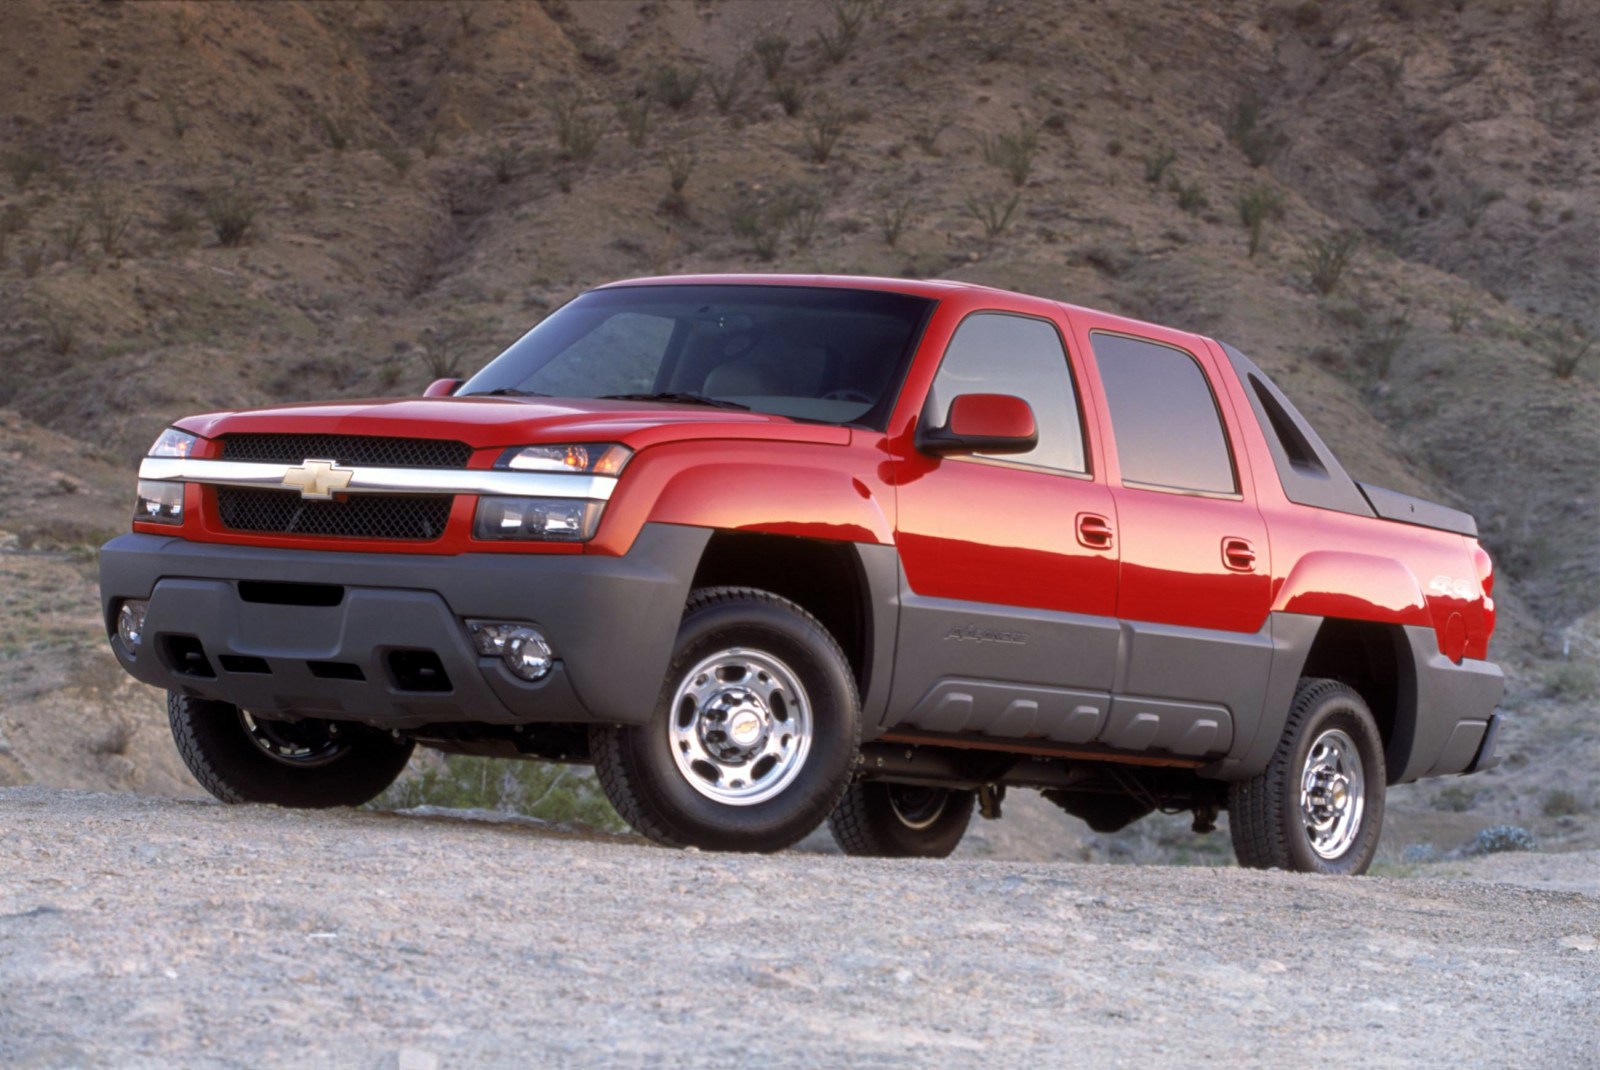 Mountain of Torque: Remembering the Short-Lived "Big-Block" Chevrolet  Avalanche | The Daily Drive | Consumer Guide® The Daily Drive | Consumer  Guide®